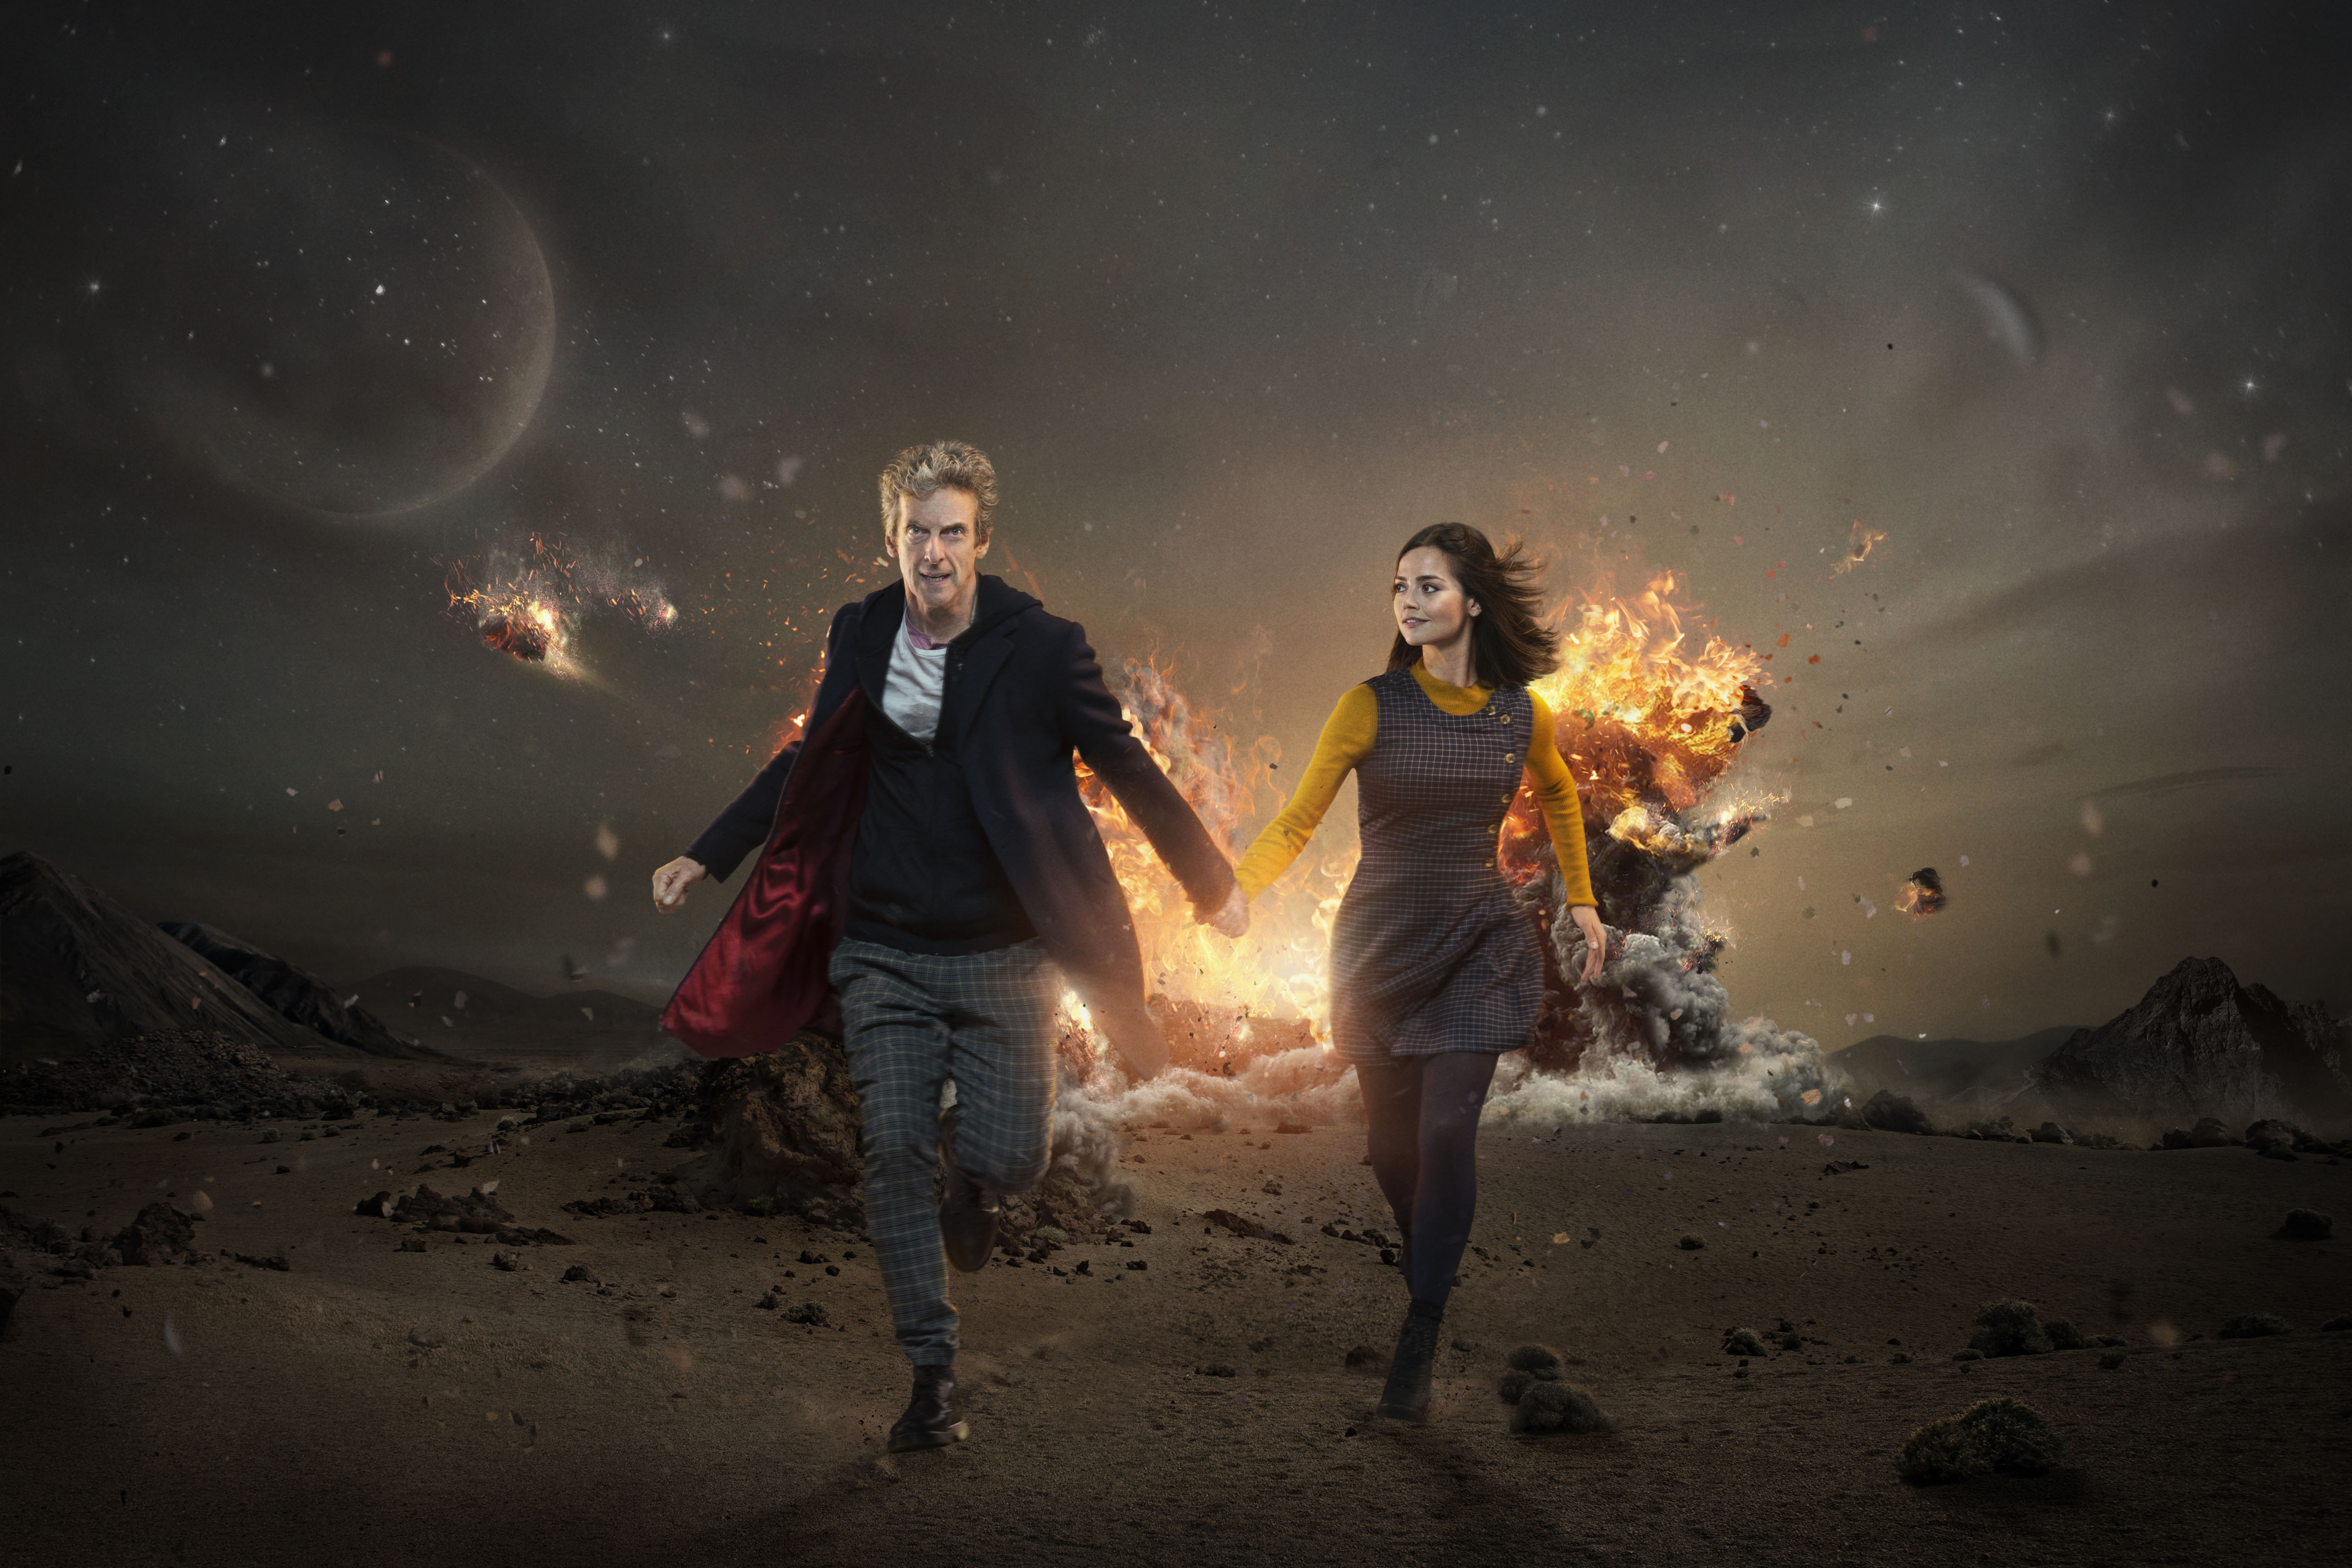 doctor who, tv show, clara oswald, jenna coleman, running, sci fi, the doctor